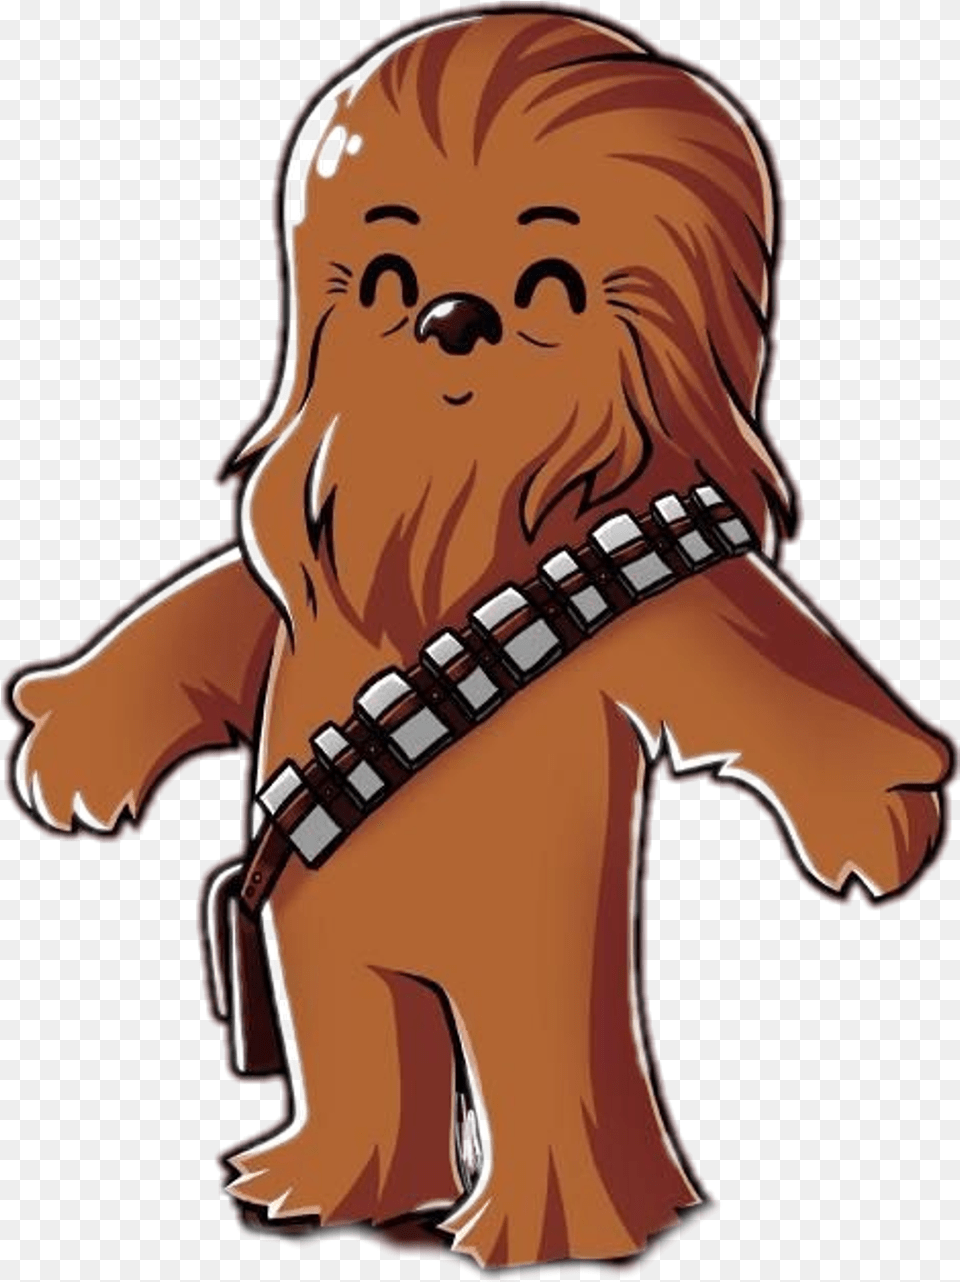 Transparent Background Chewbacca Clipart Cute Chewbacca Cartoons, Baby, Person, Puppy, Animal Png